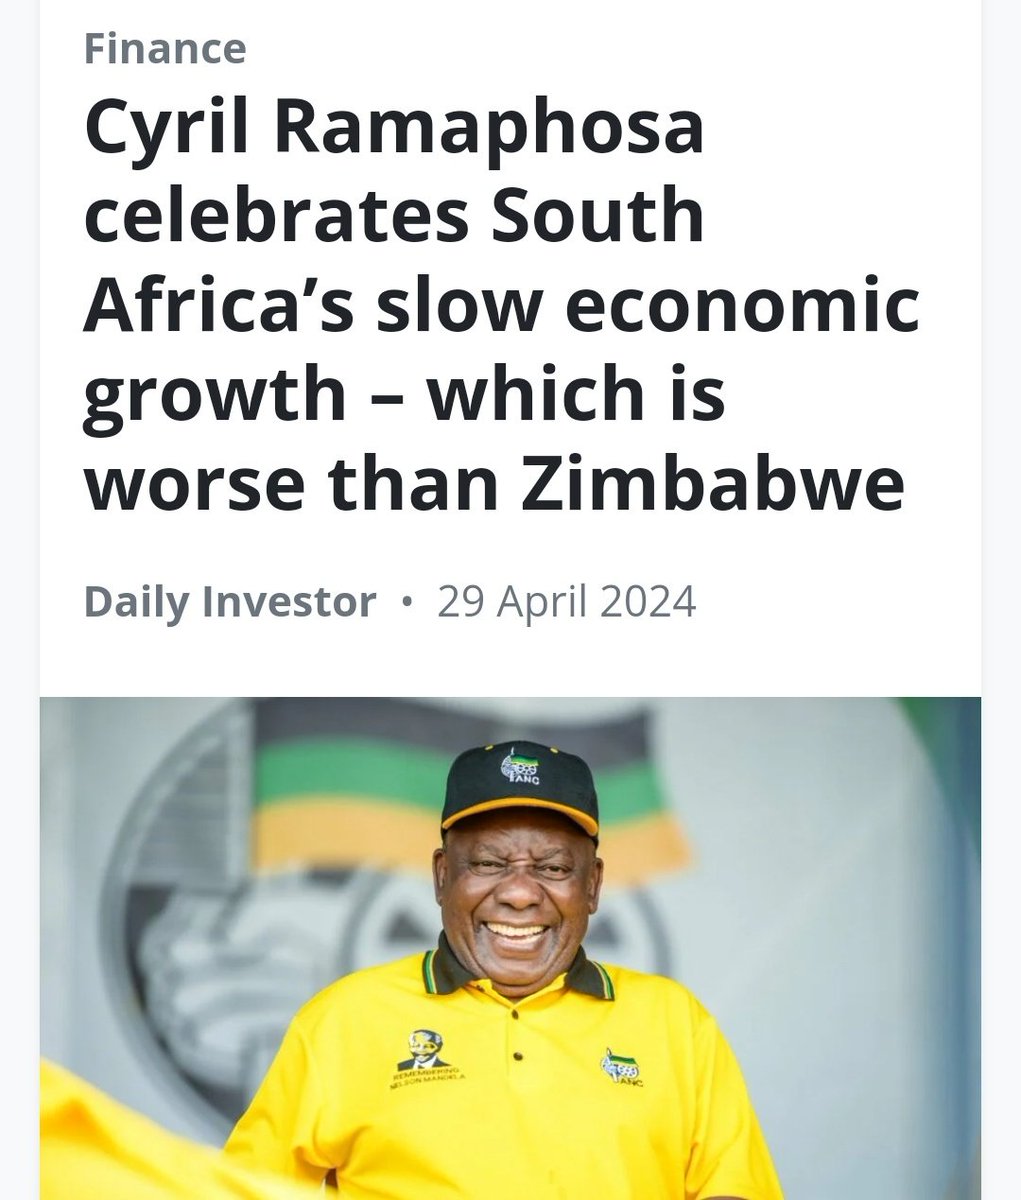 Ramaphosa and his ANC have destroyed this country.